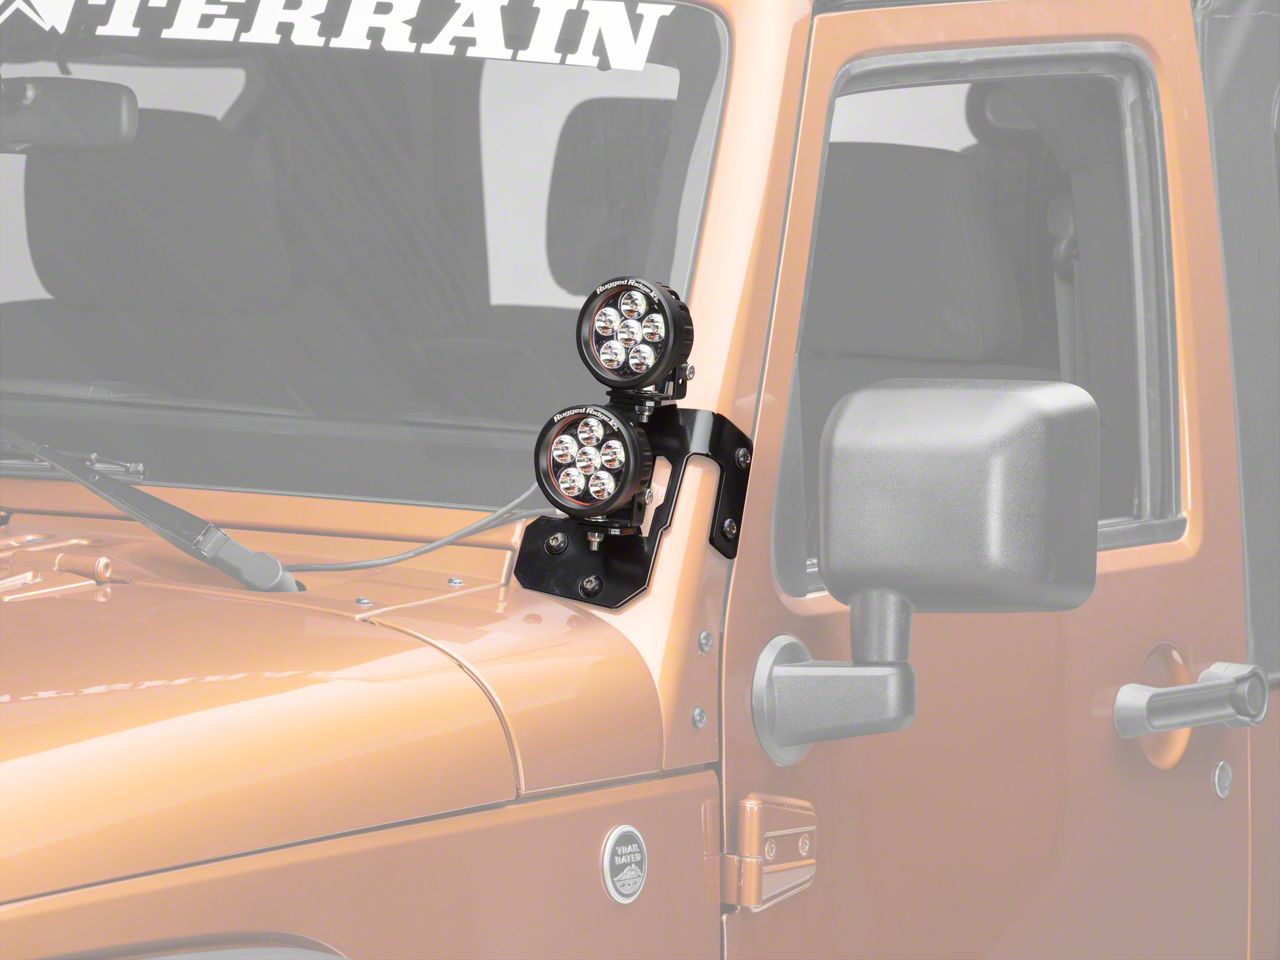 Post mount spotlight 100W Halogen 6 inch 2007 Jeep WRANGLER UNLIMITED 4DR -Chrome Driver side WITH install kit 